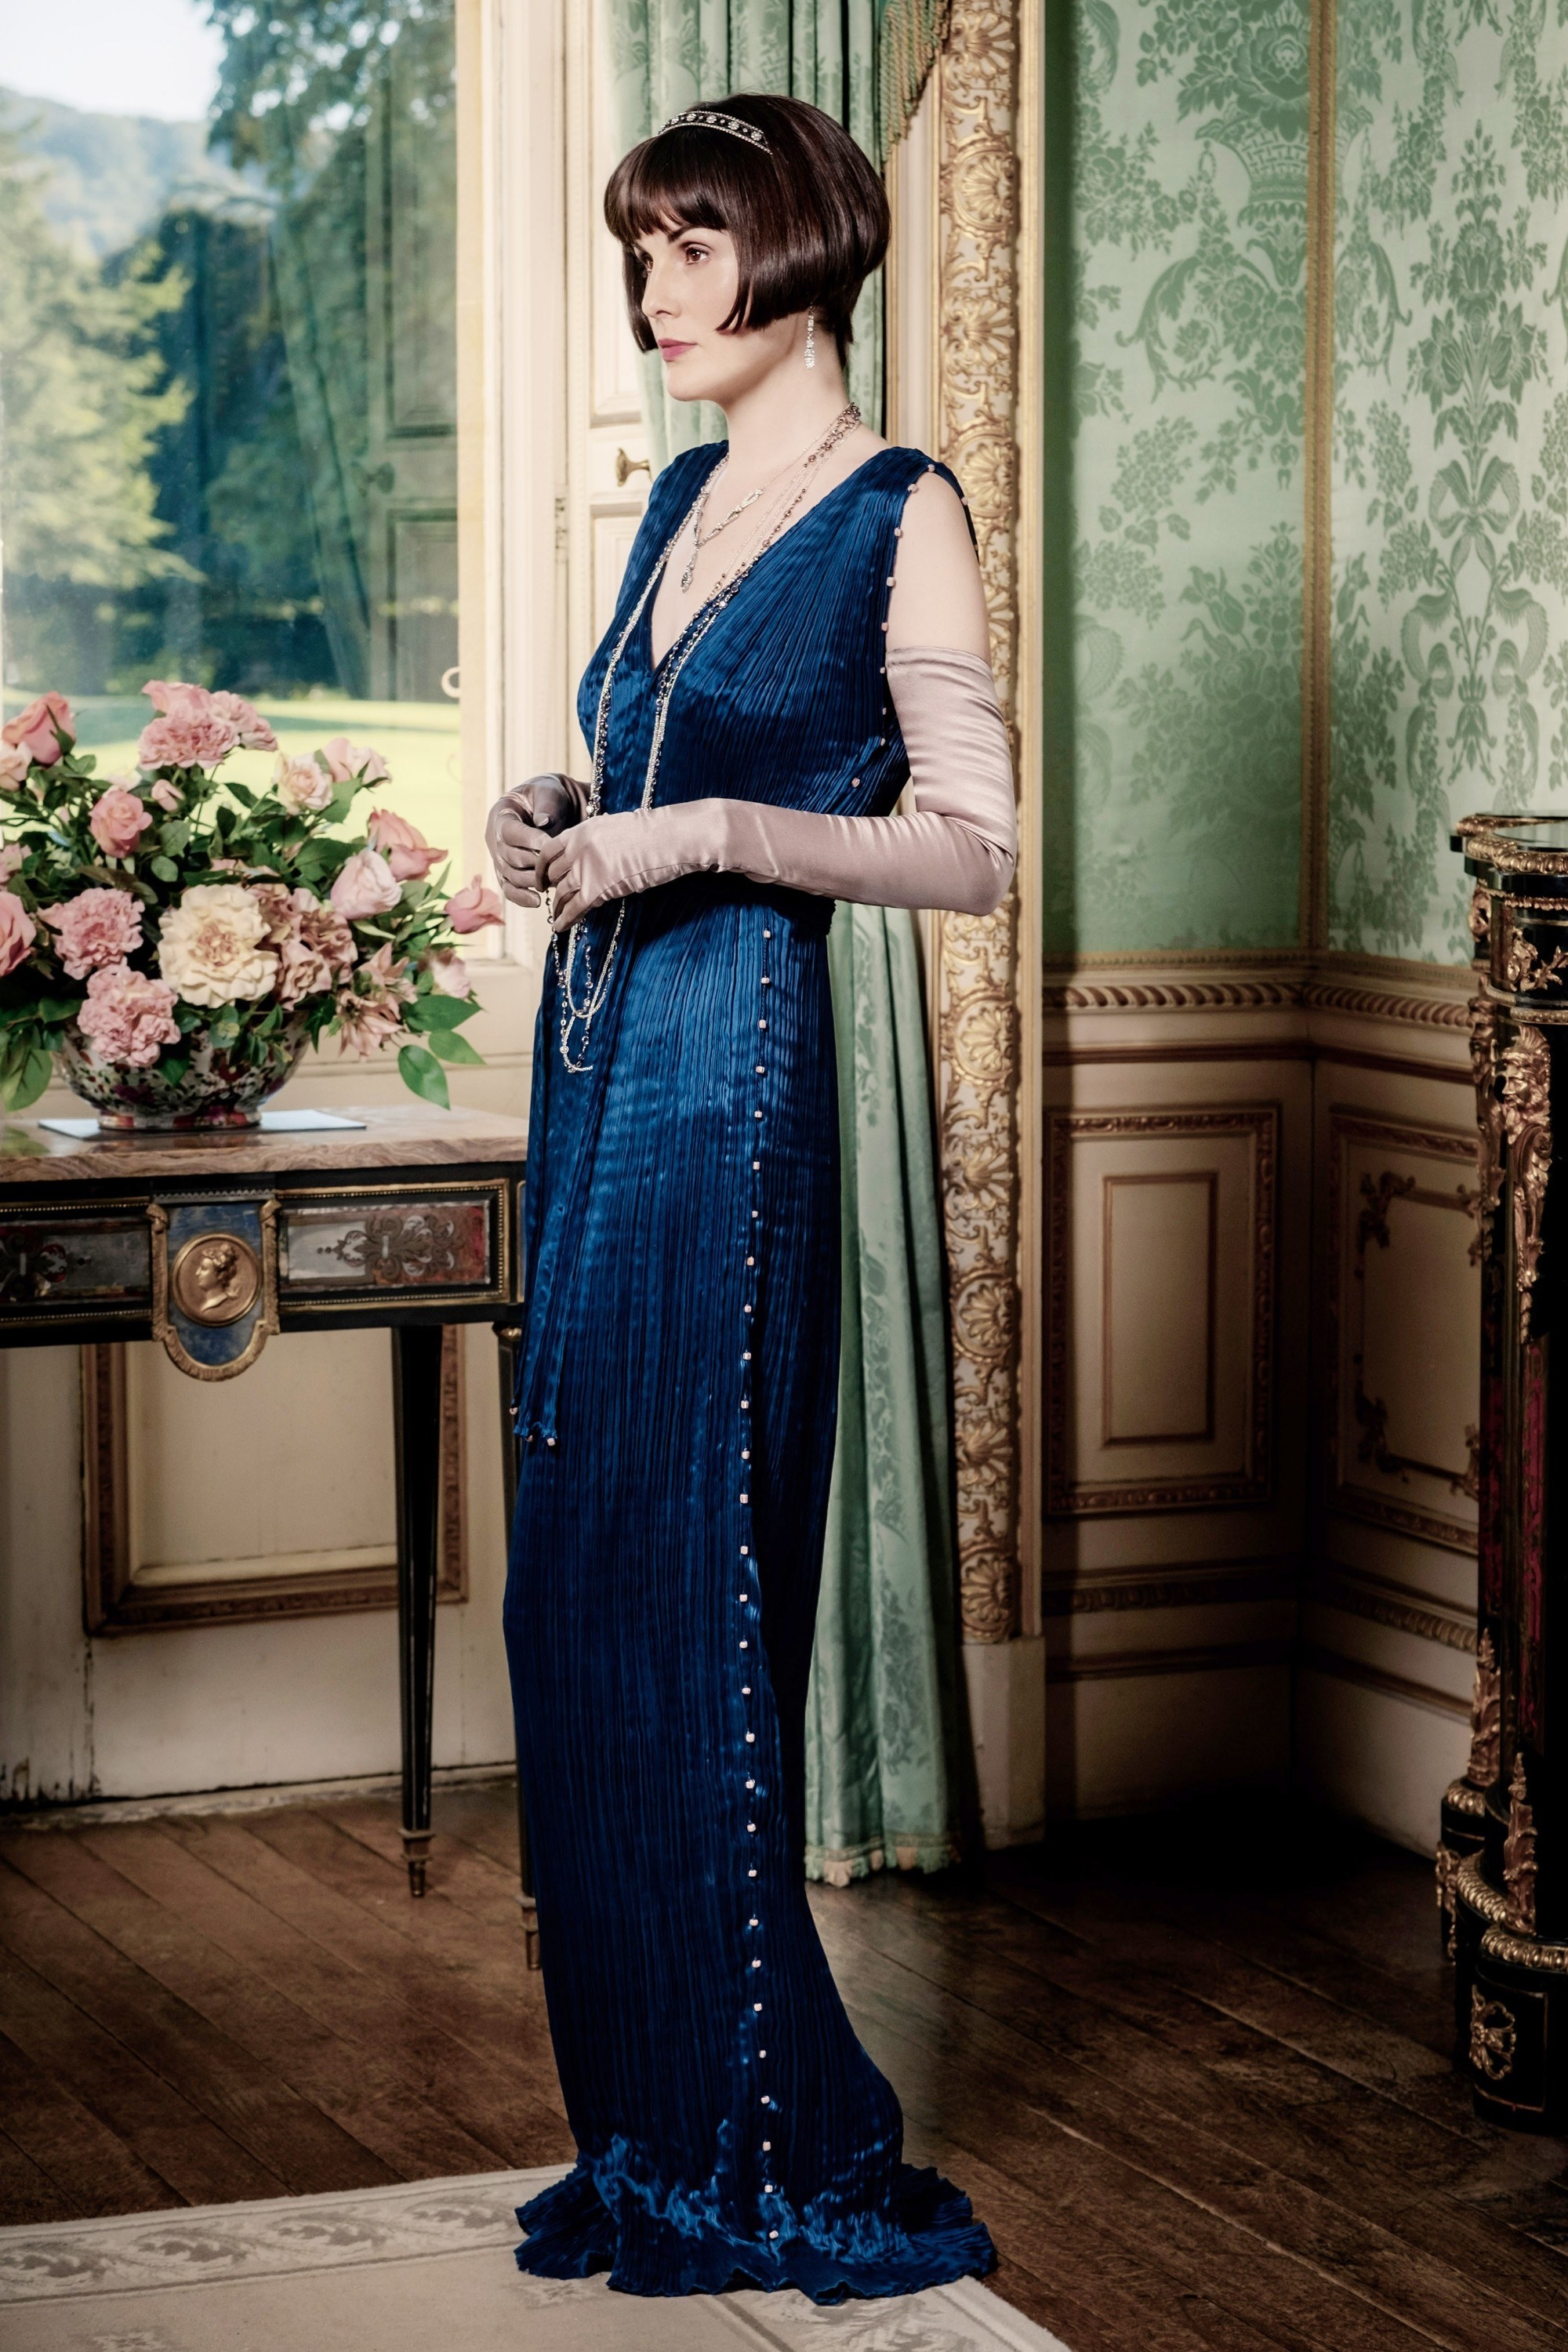 A woman wearing a more form-fitting dress on &quot;Downton Abbey: A New Era&quot;